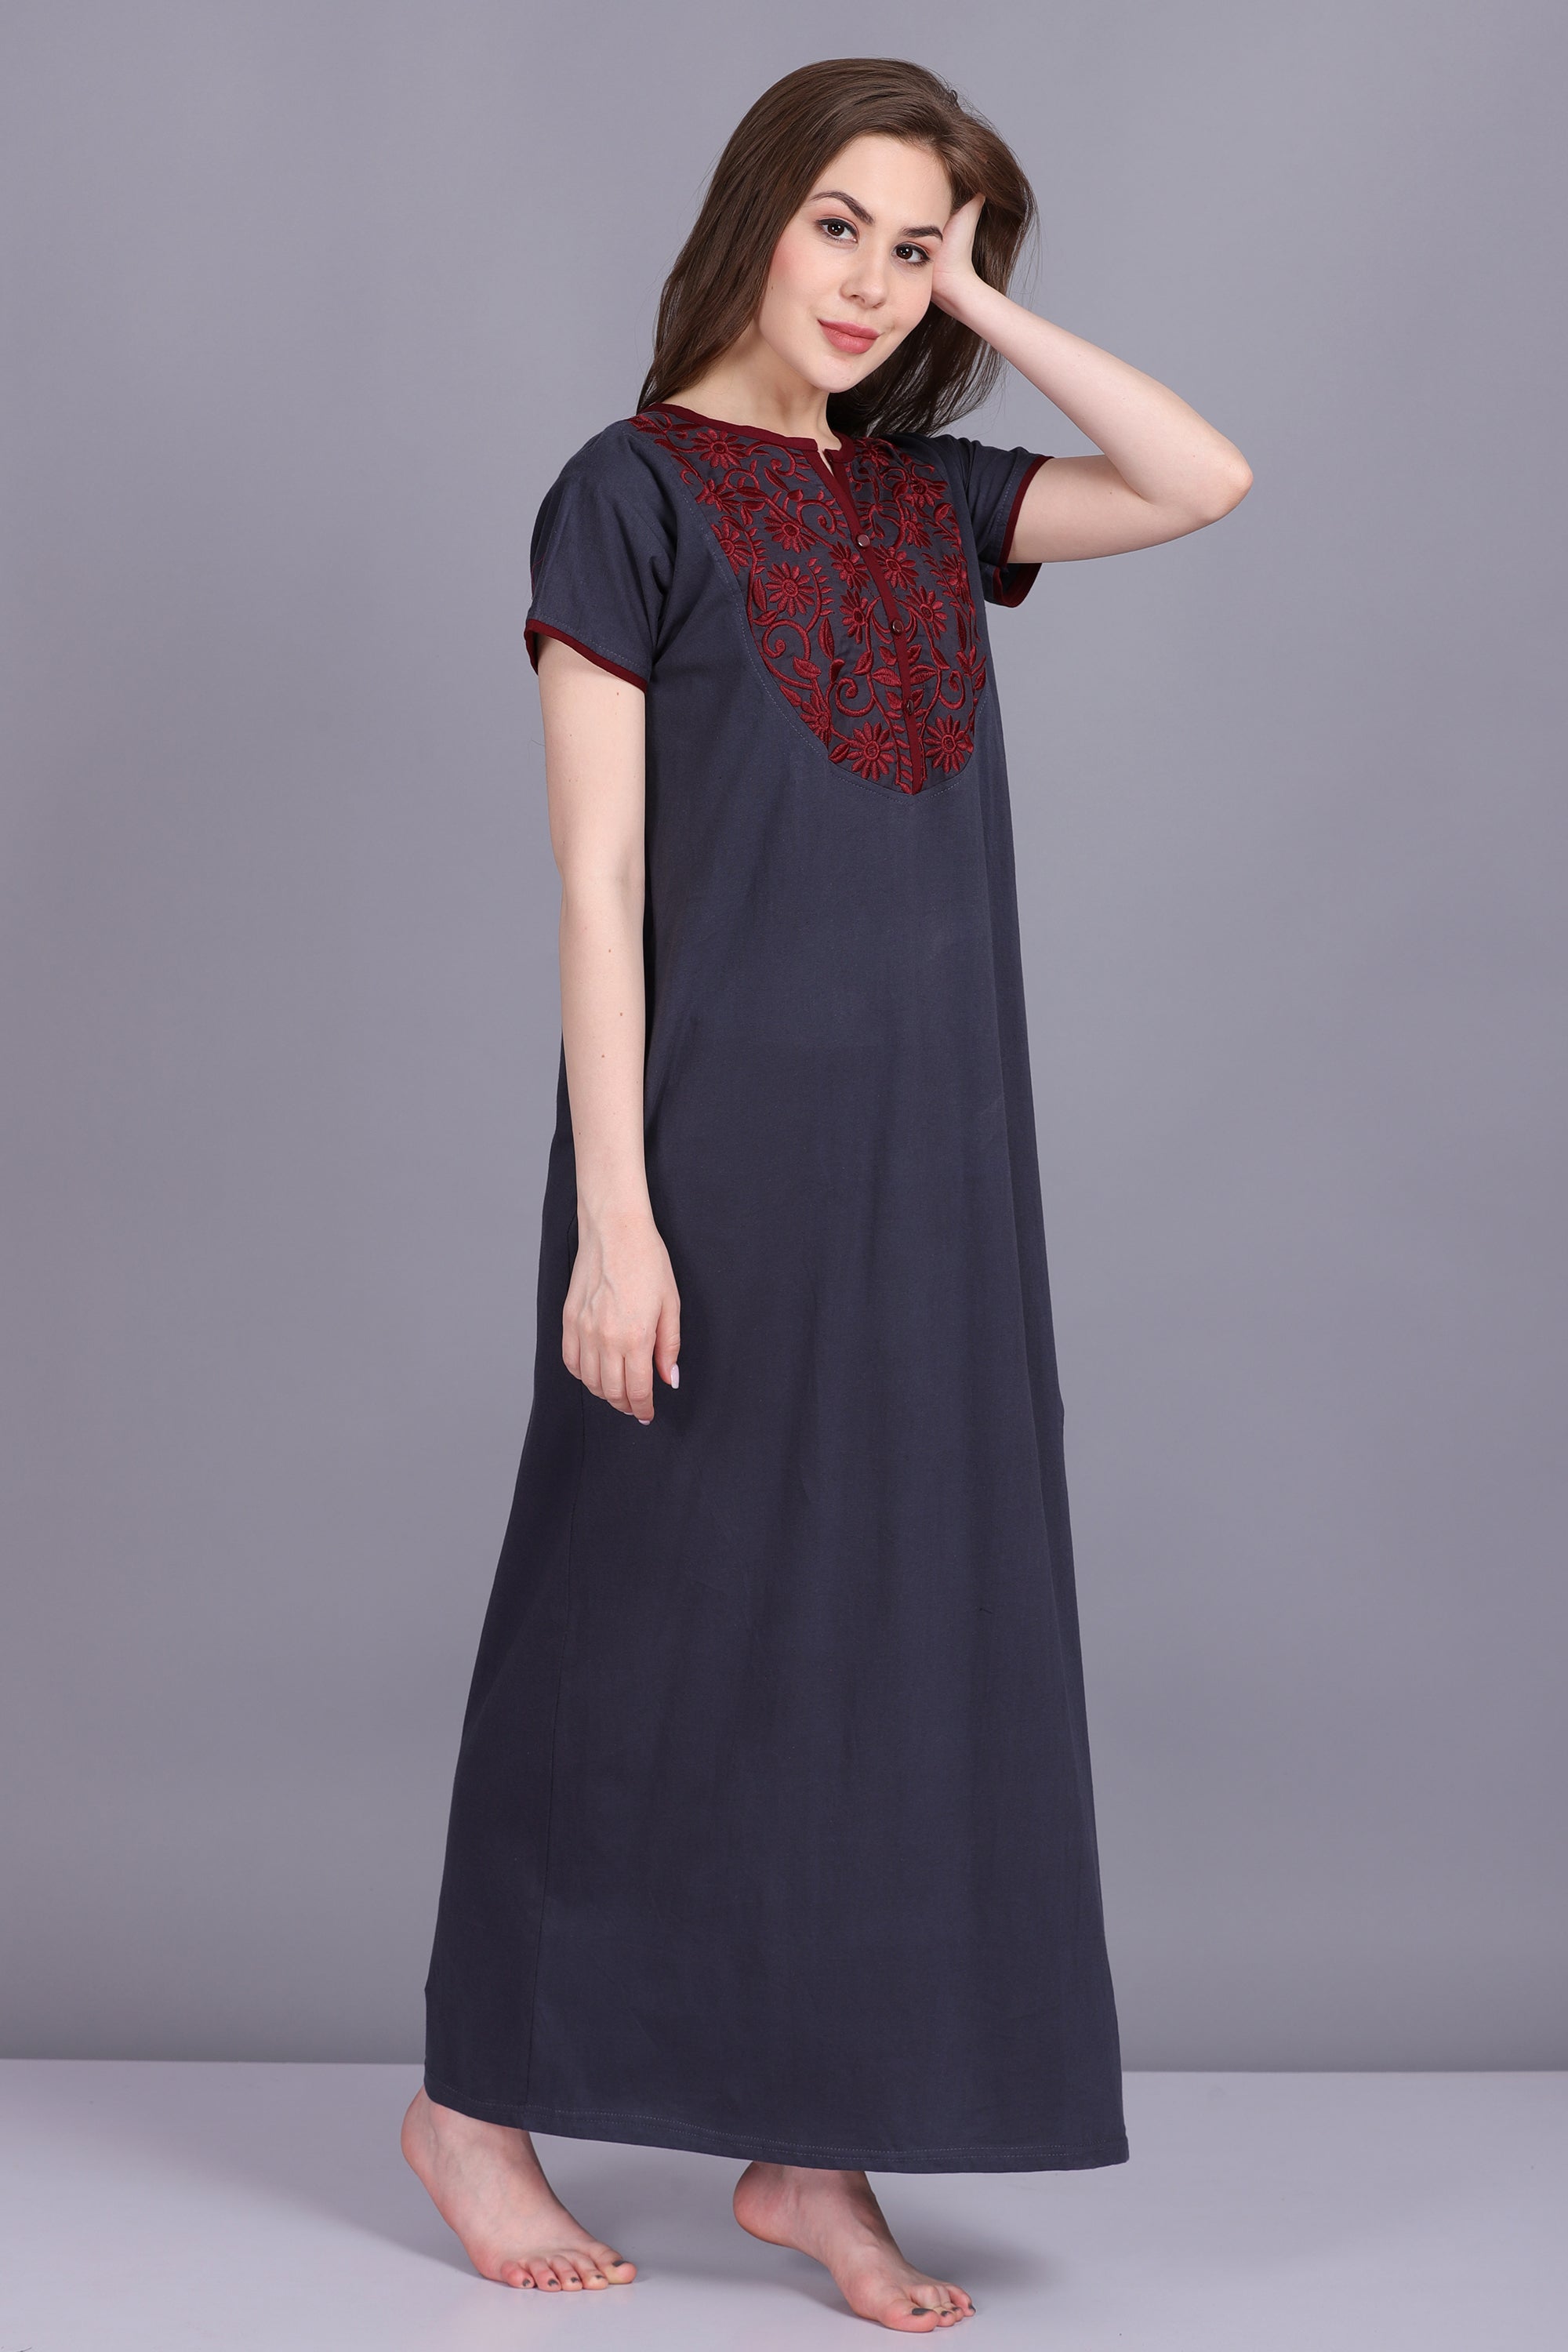 Stylish and Comfortable Cotton Night Gown for Women